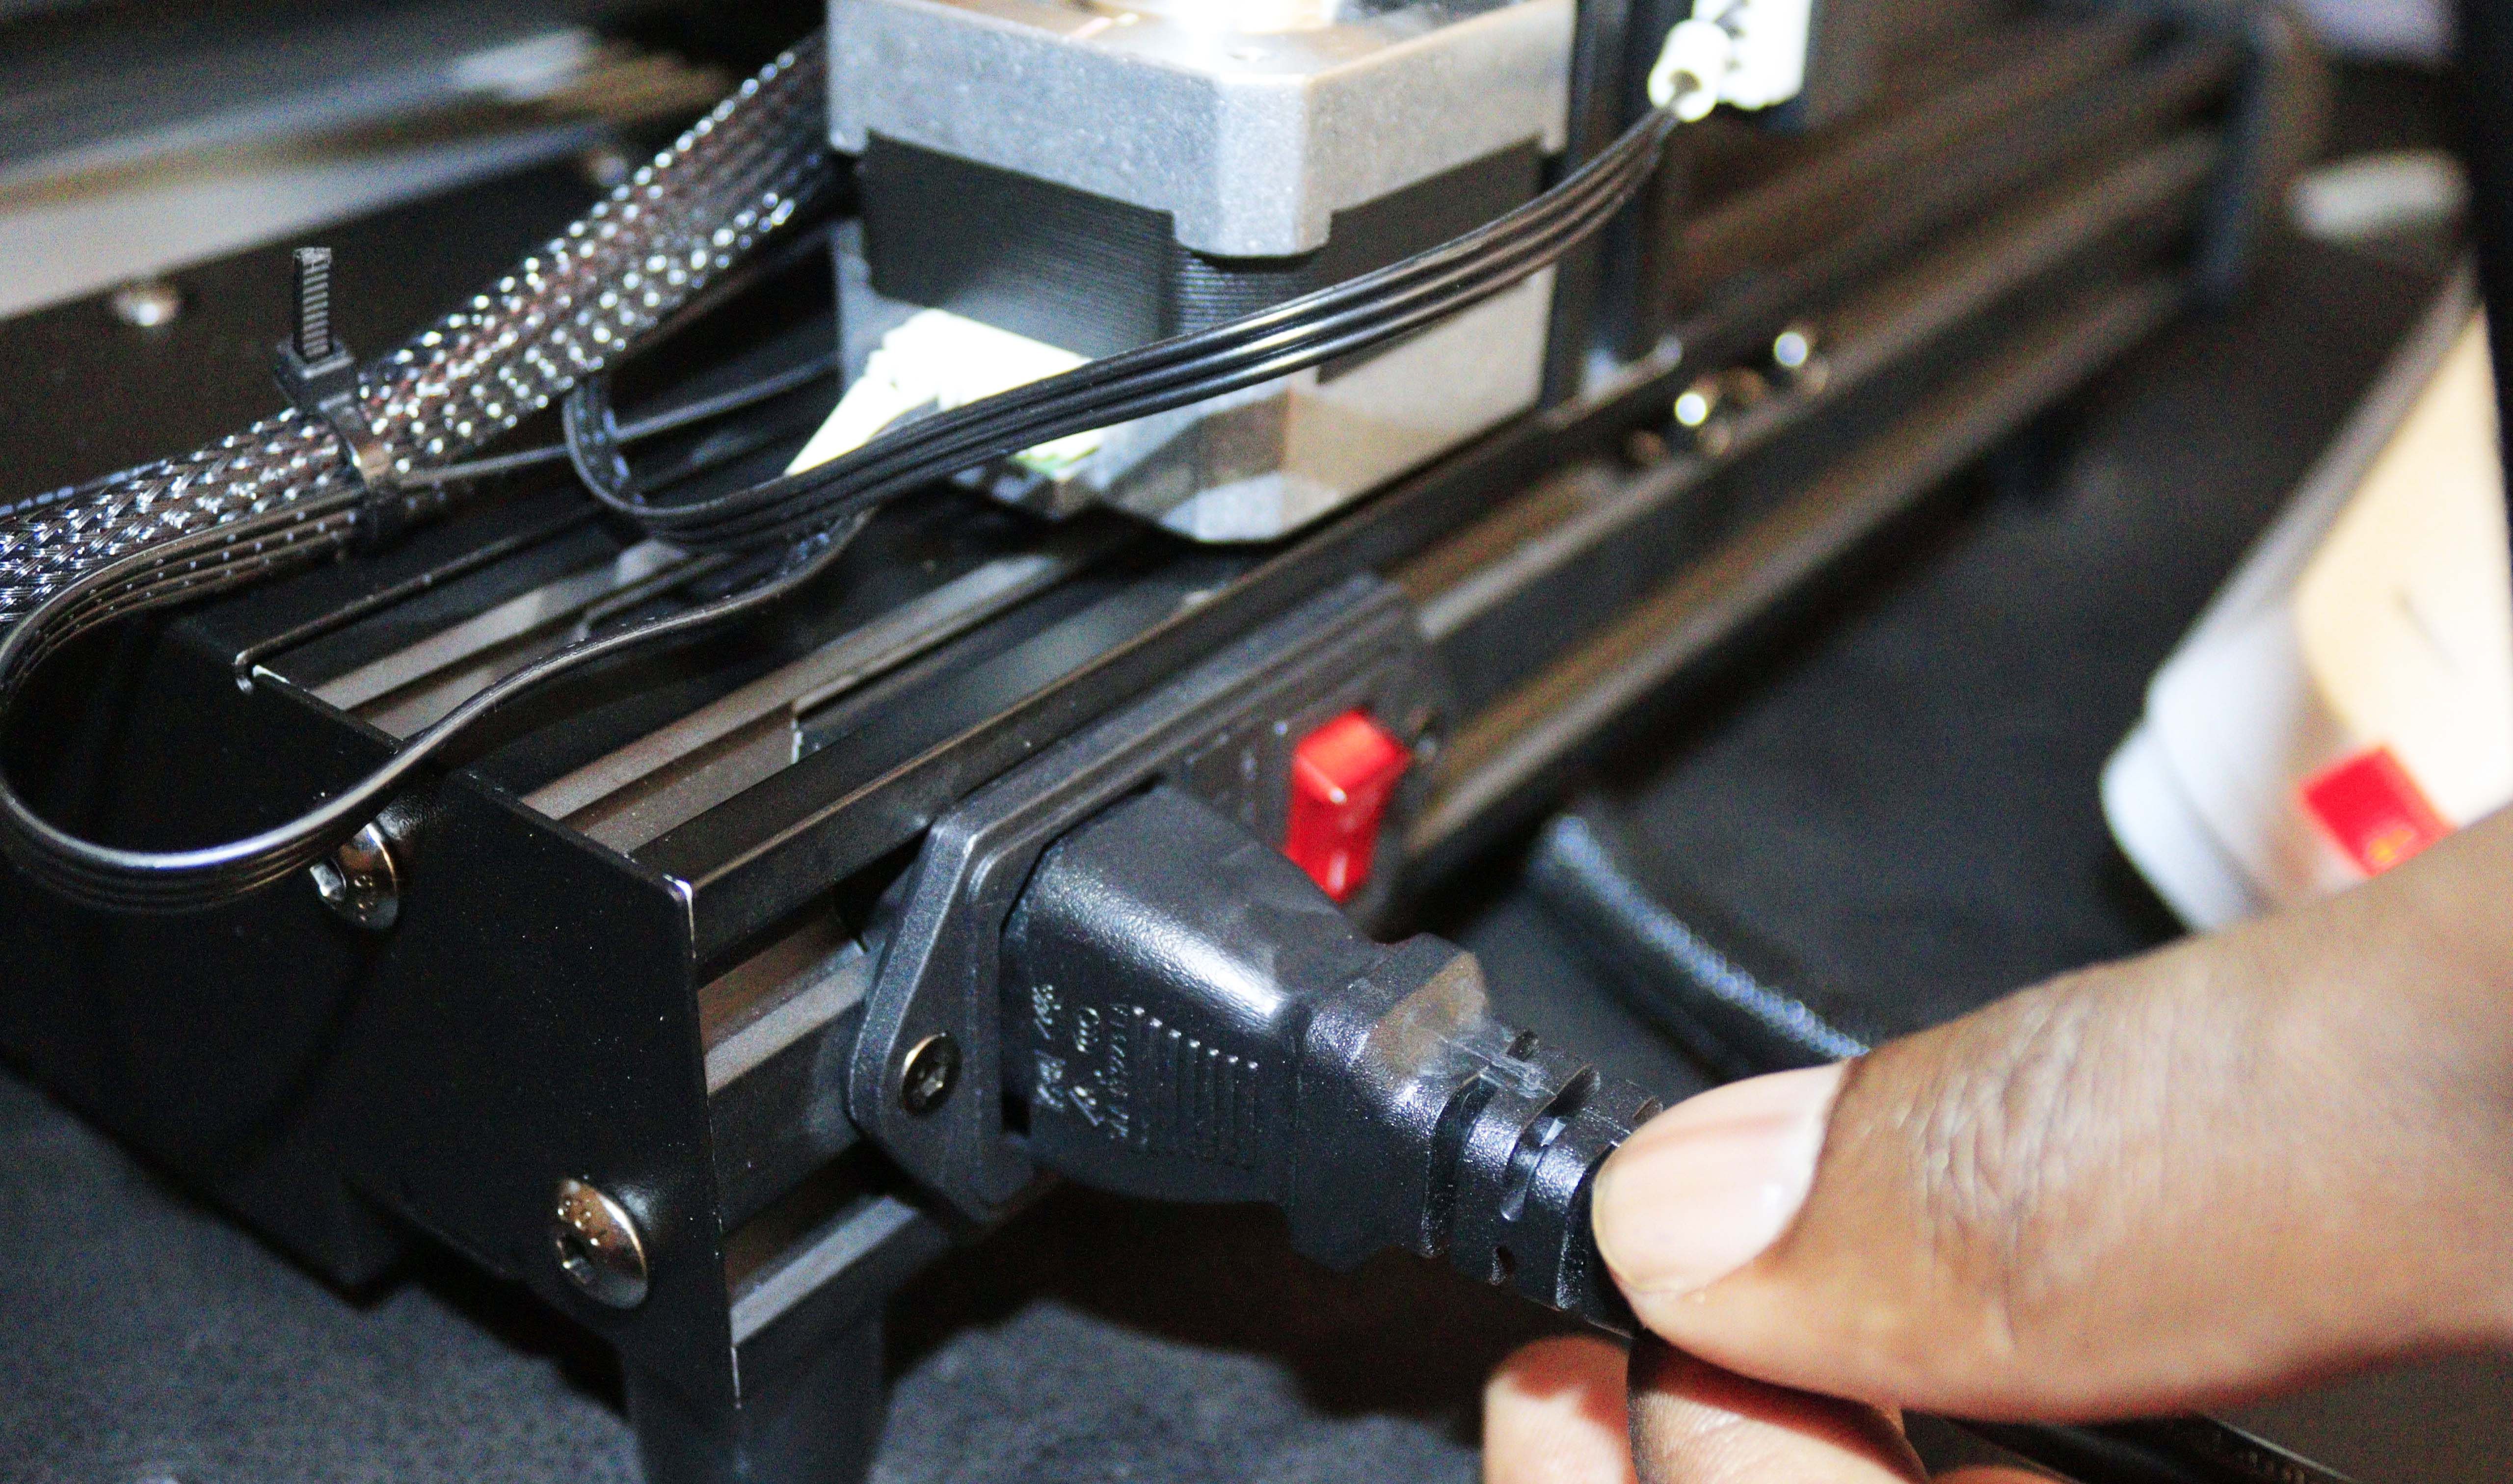 Placing the power cord to the 3D printer